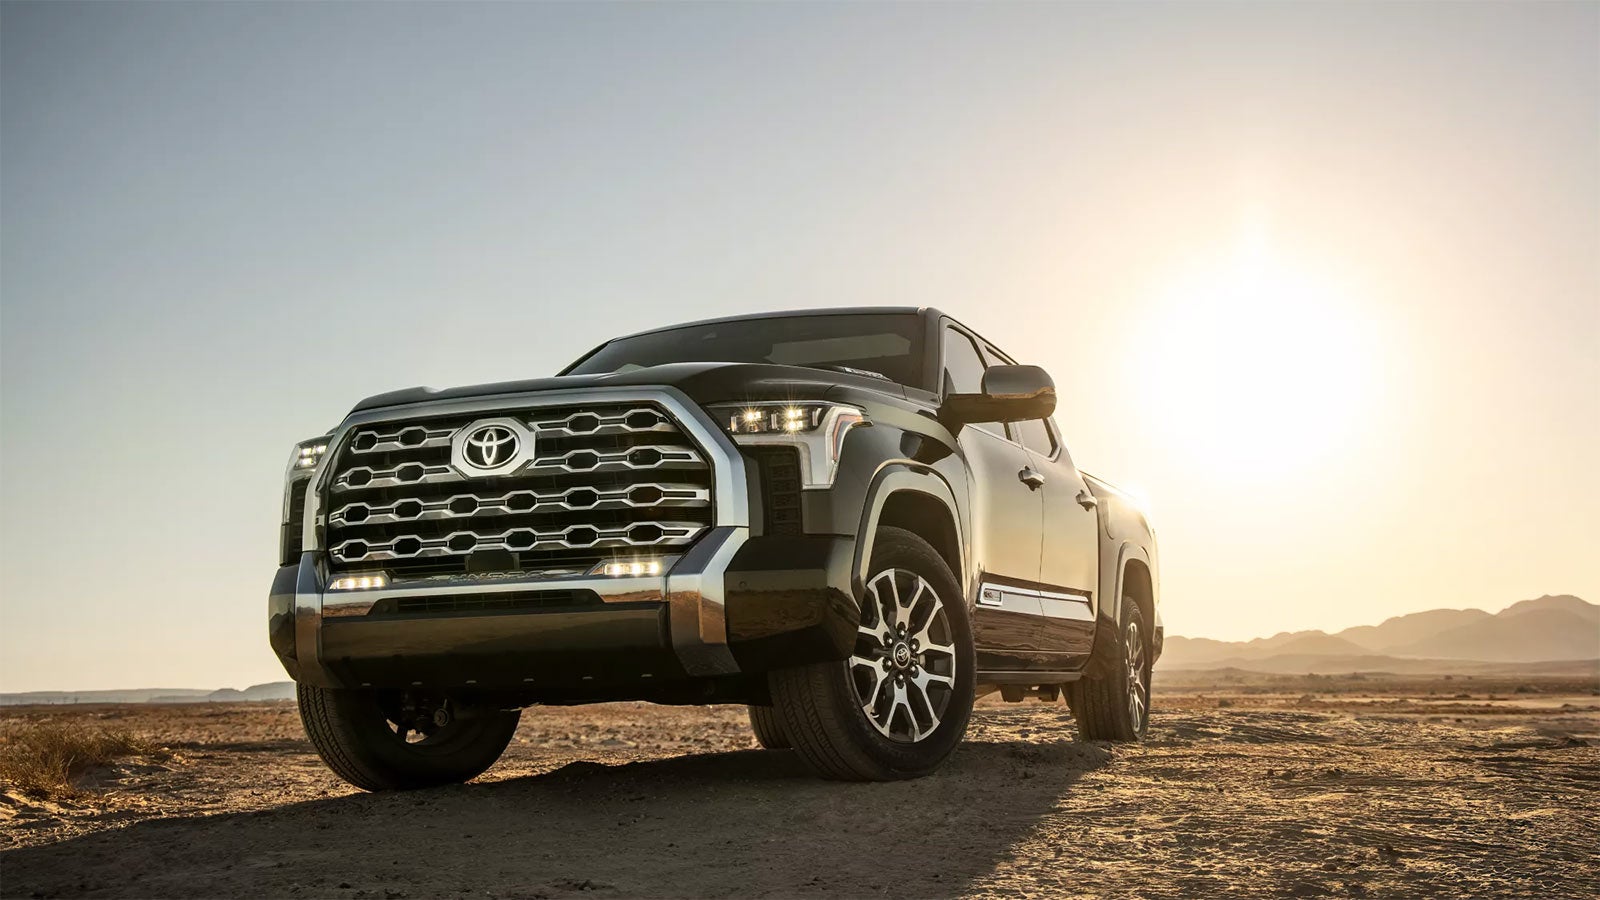 2022 Toyota Tundra Gallery | Crown Toyota in Ontario CA